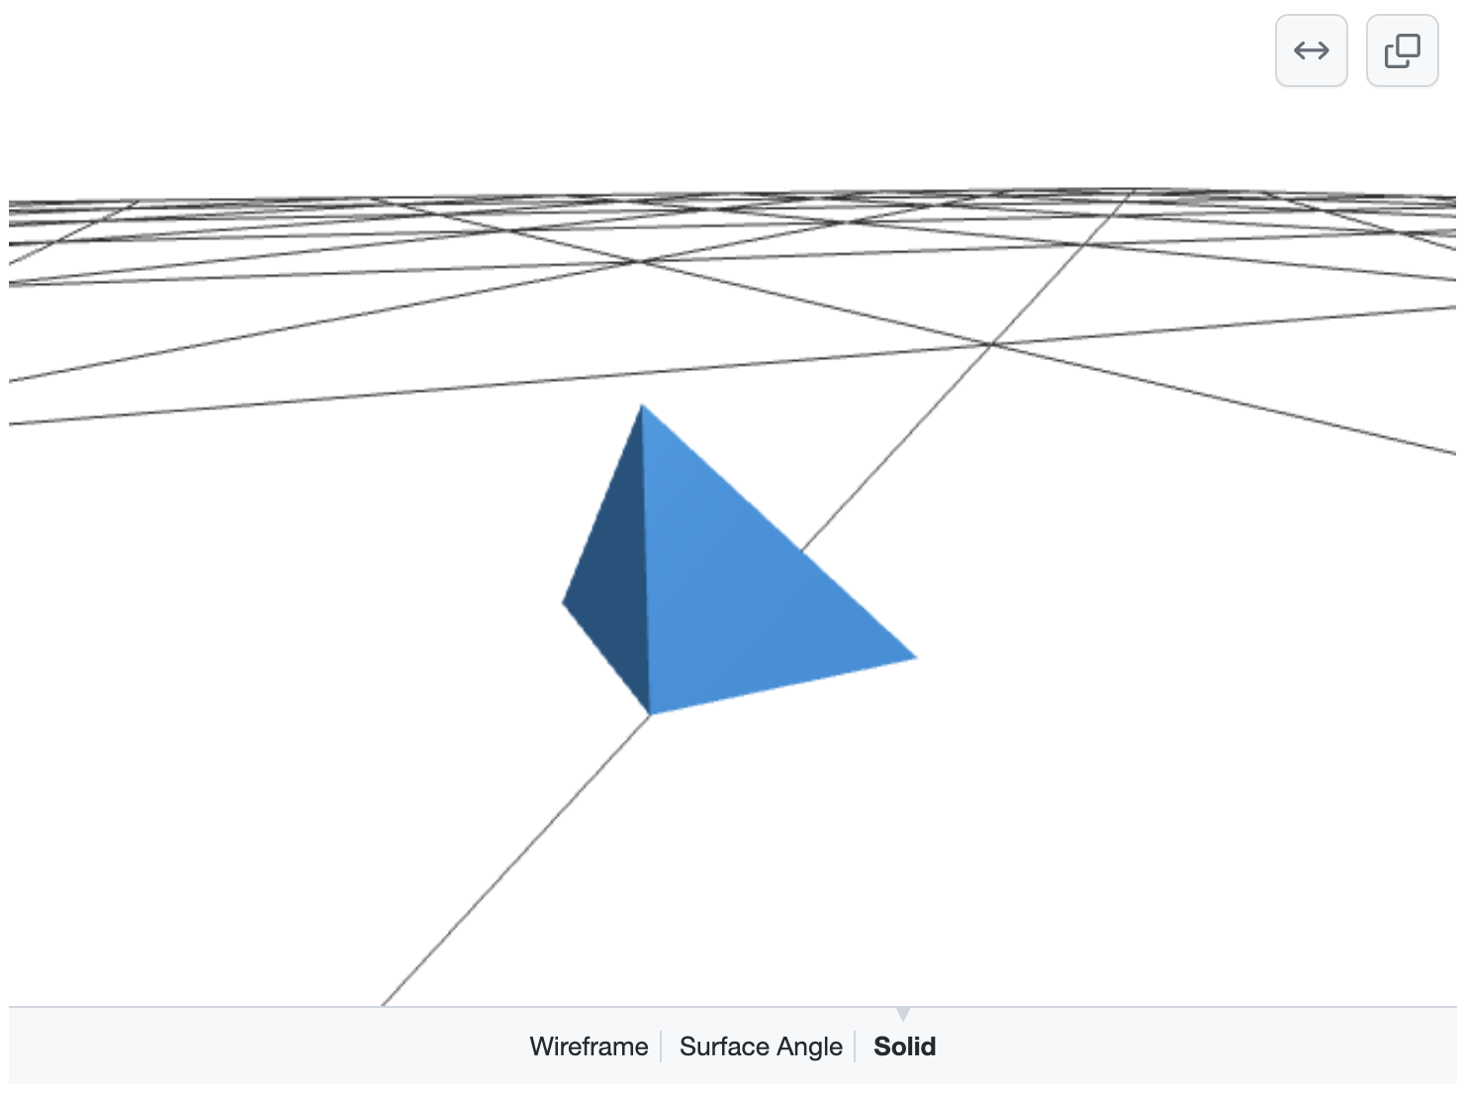 Screenshot of a 3D model of a blue pyramid atop a grid of black lines on a white ground. Options to select "Wireframe", "Surface Angle", or "Solid" appear at bottom.